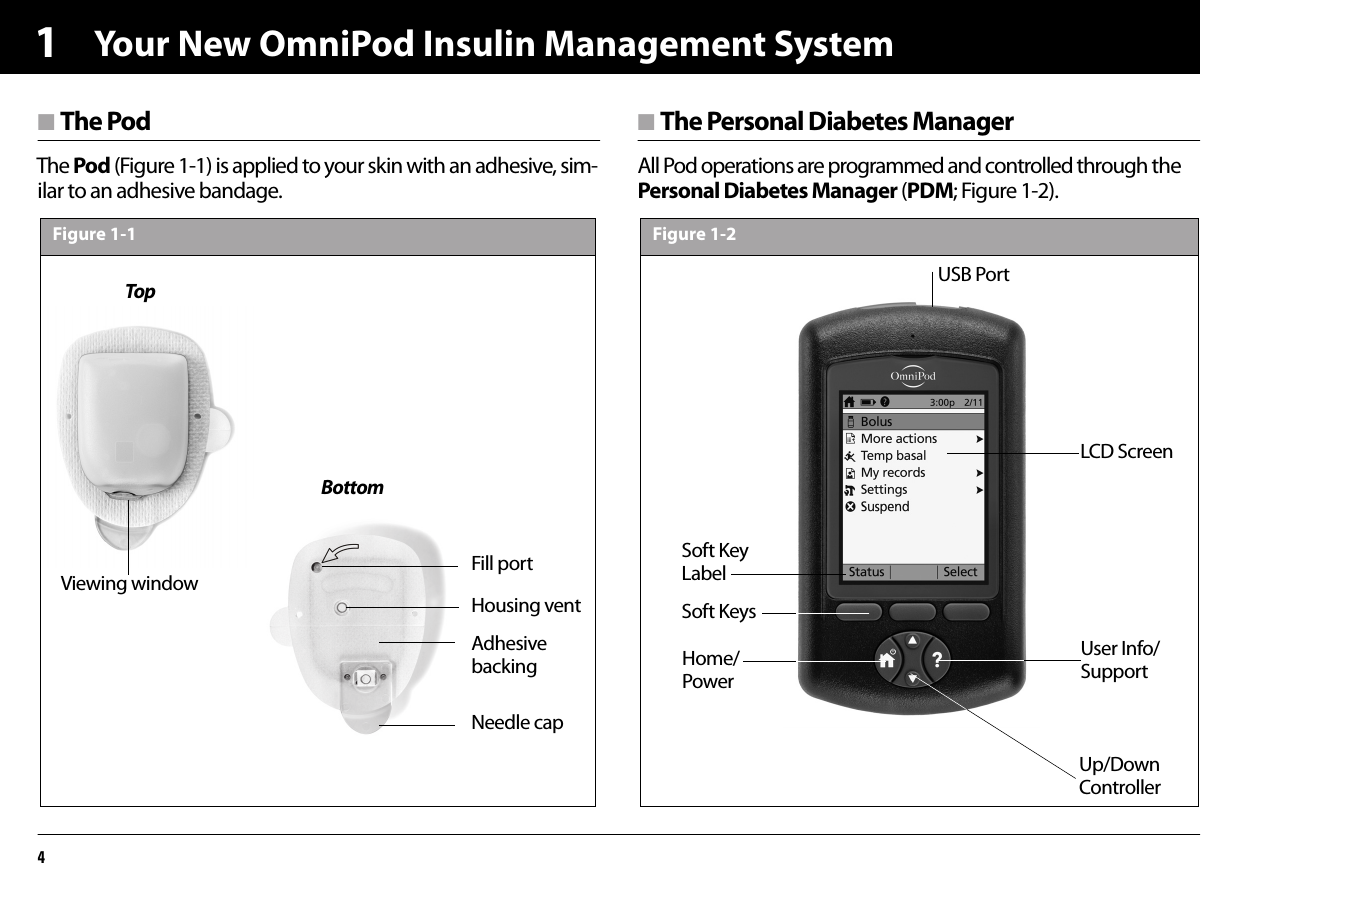 Your New OmniPod Insulin Management System41n The PodThe Pod (Figure 1-1) is applied to your skin with an adhesive, sim-ilar to an adhesive bandage.n The Personal Diabetes ManagerAll Pod operations are programmed and controlled through the Personal Diabetes Manager (PDM; Figure 1-2).TopBottomNeedle capViewing windowFill portFigure 1-1Adhesive backingHousing ventFigure 1-2Up/Down ControllerUser Info/SupportSoft Key LabelSoft KeysHome/PowerUSB PortLCD Screen